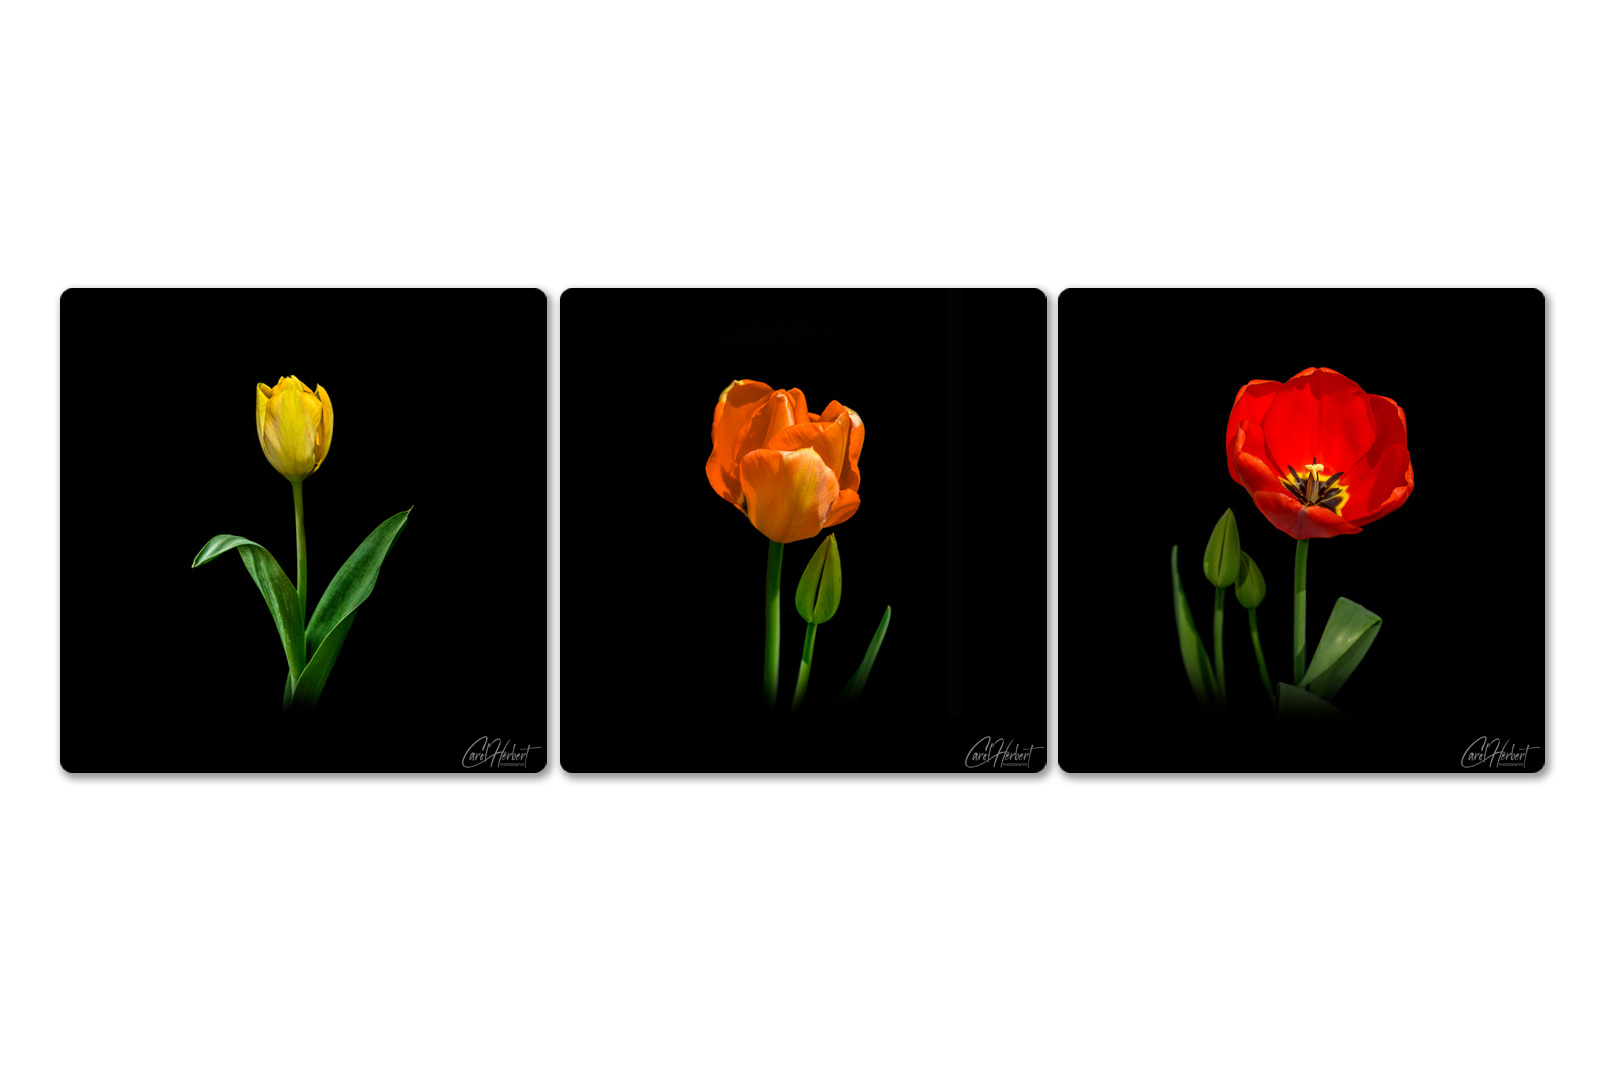 Three canvases with a single yellow, orange and red tulip